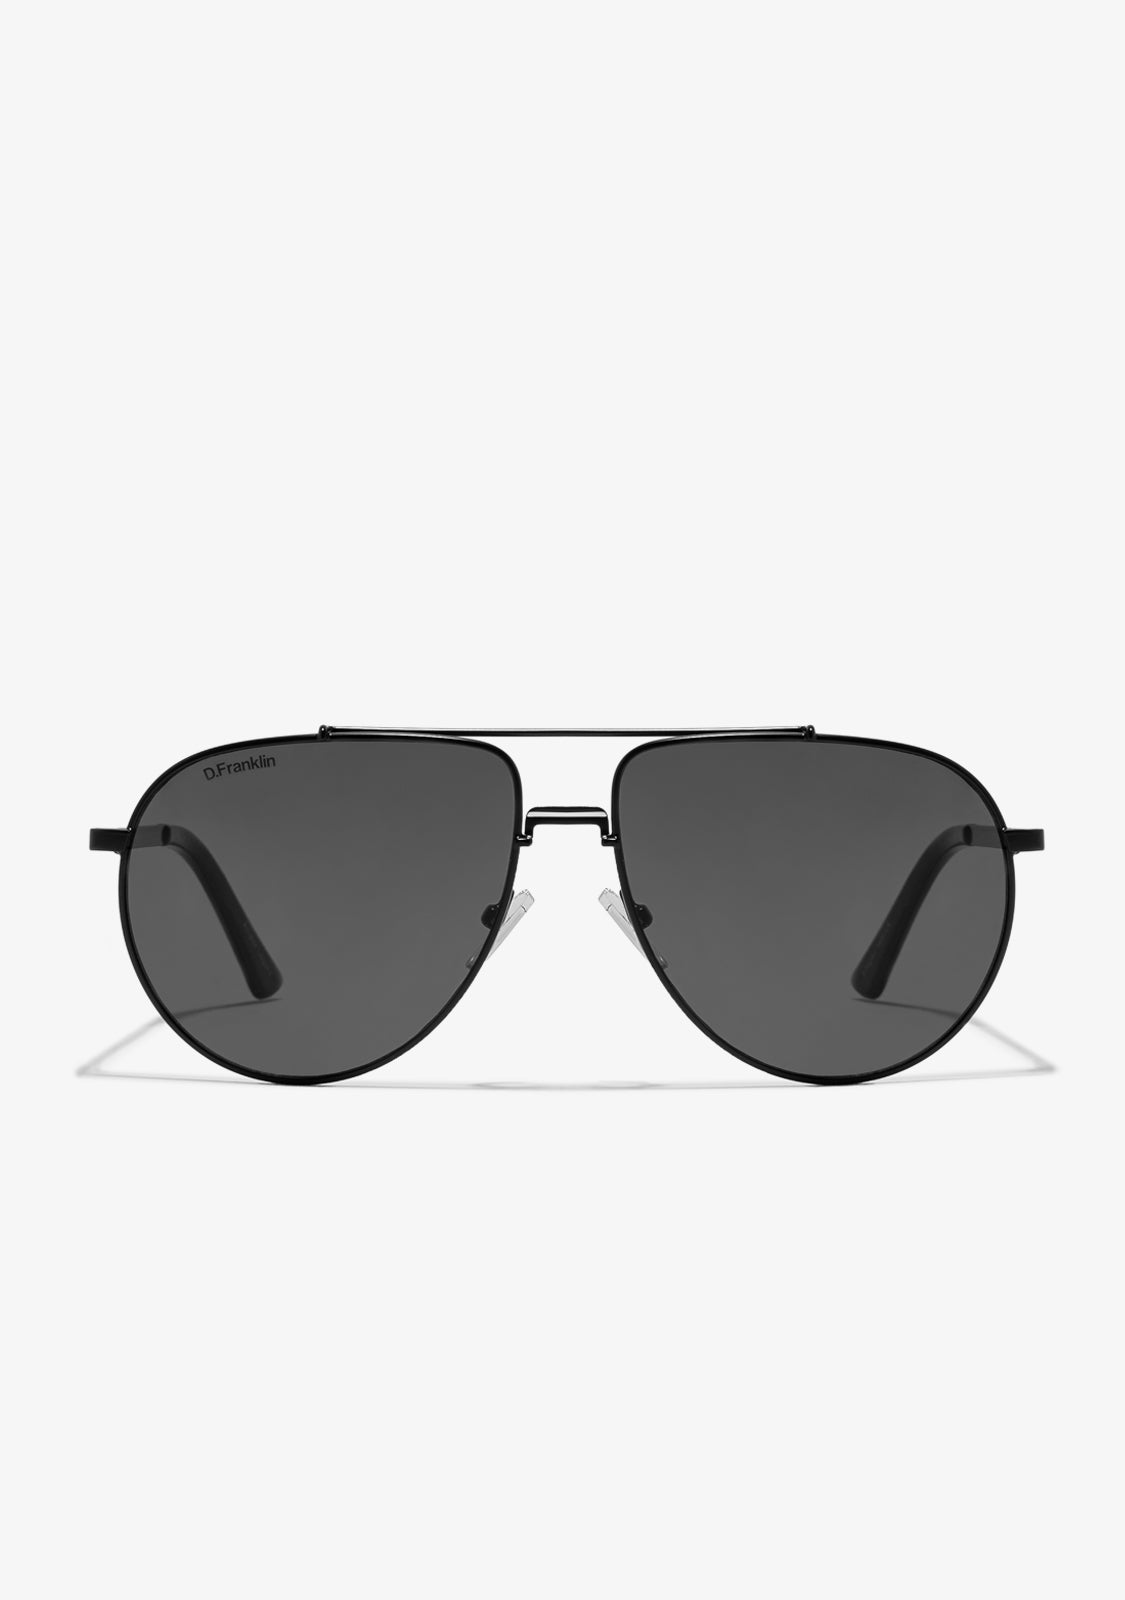 Buy Hawkers HAWKERS POLARIZED Black Dark TRACK Sunglasses for Men and  Women, Unisex. UV400 Protection. Official Product designed in Spain Online